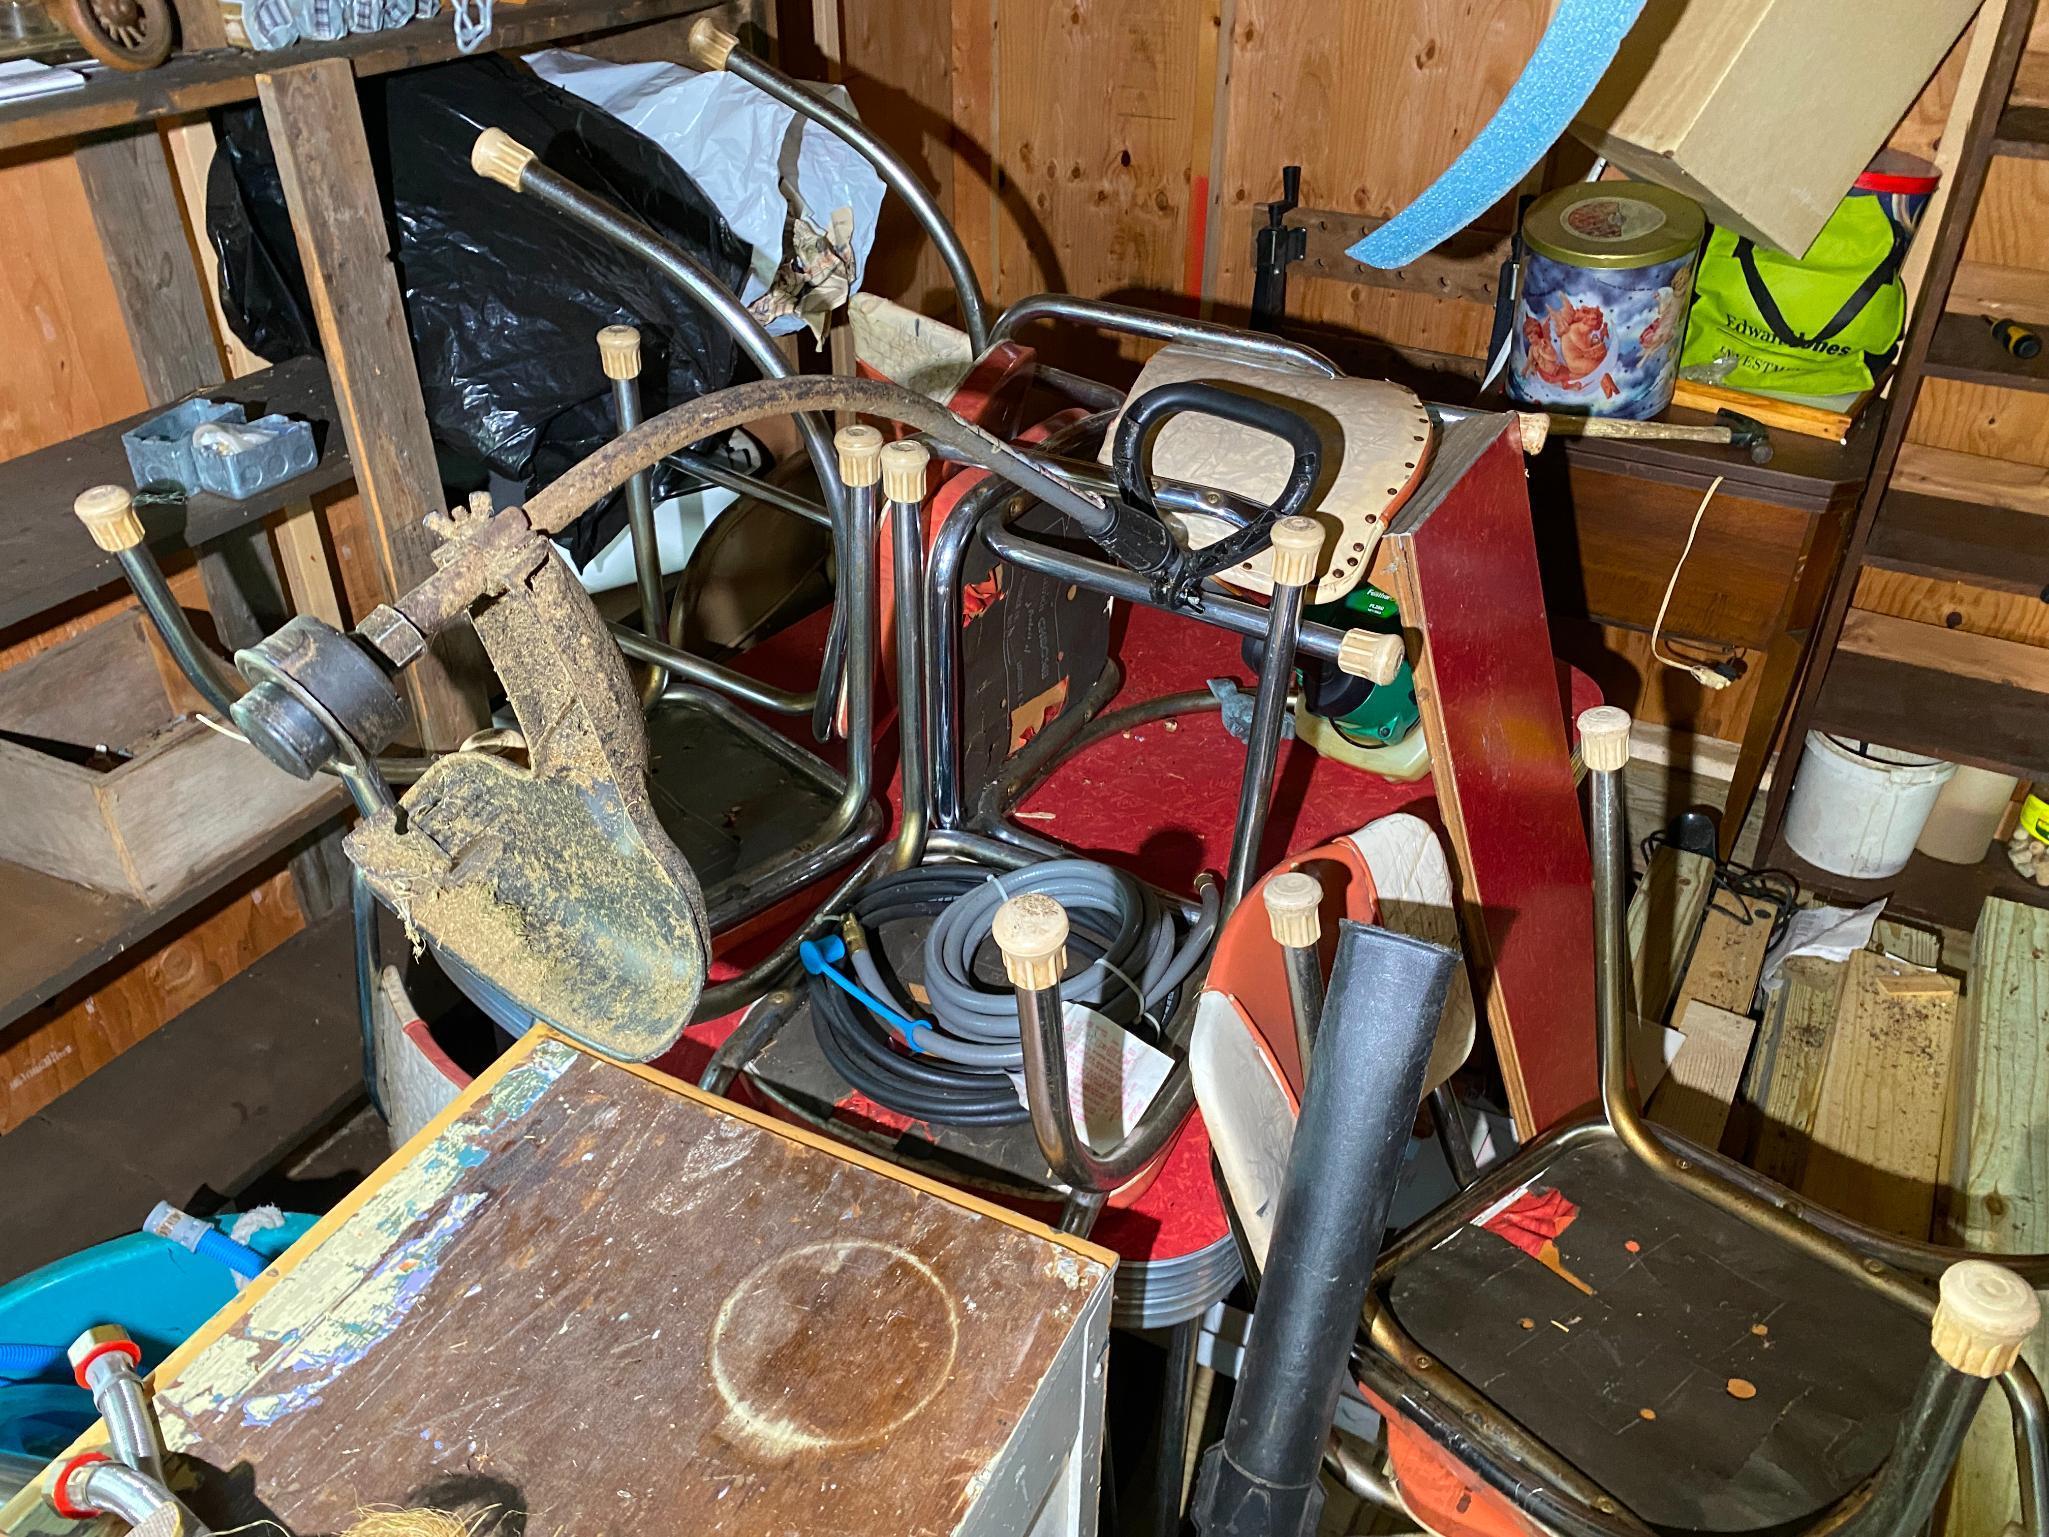 Total Shed Contents Lot - Furniture, Primitives & Much More